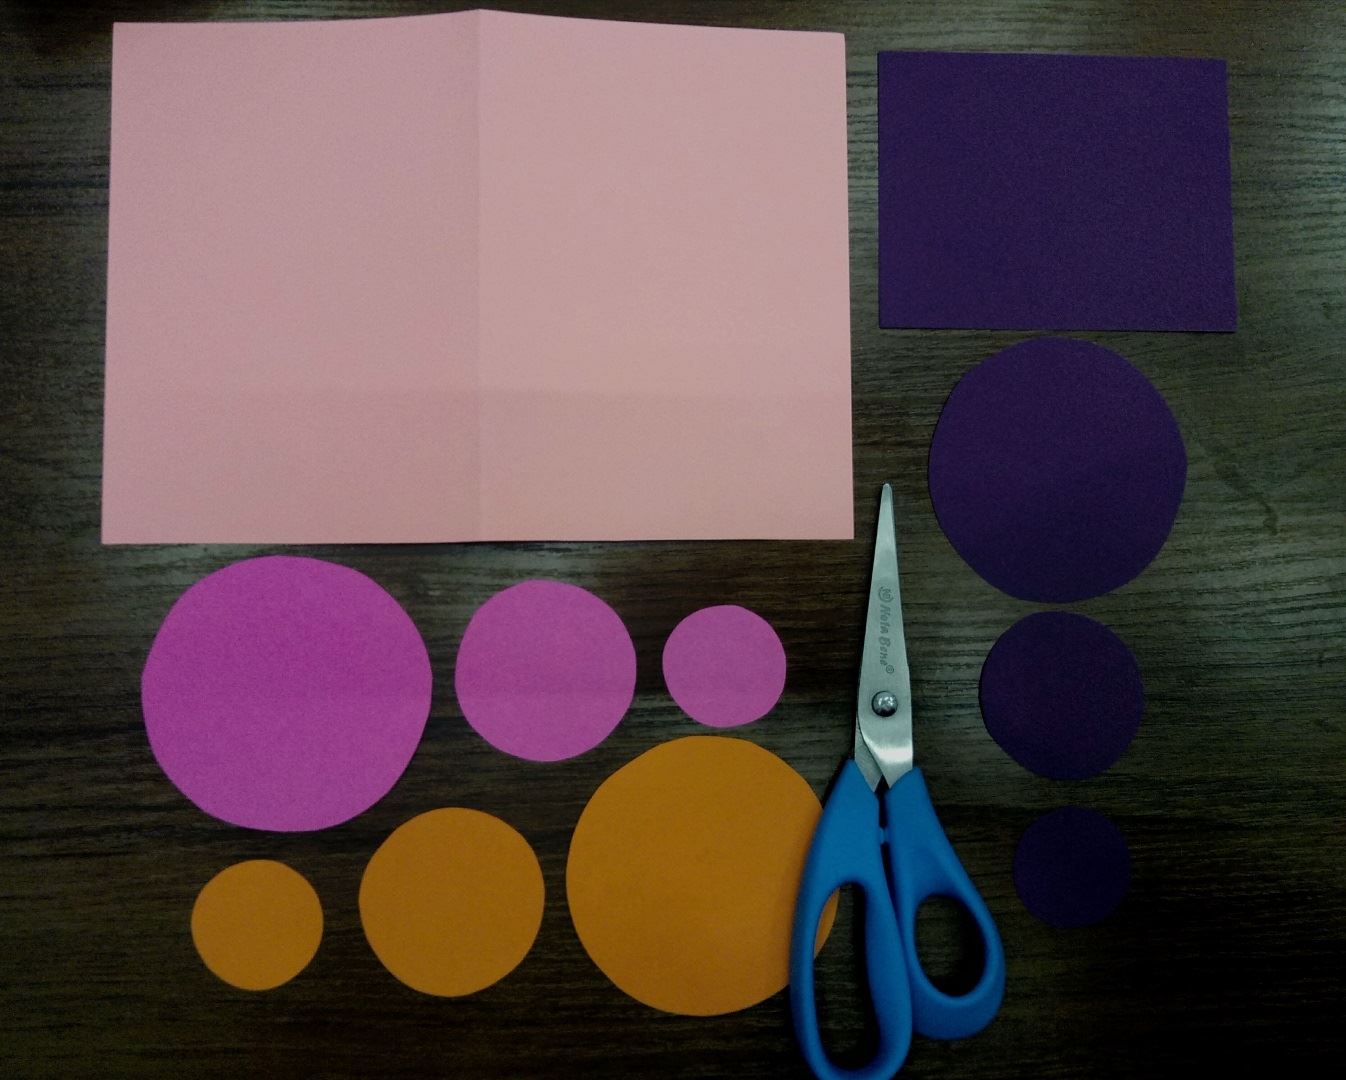 Cut out 3 circles: 1 large, 1 medium and 1 small from pink, lilac and orange paper. Also cut out a purple rectangle. It's very simple :)